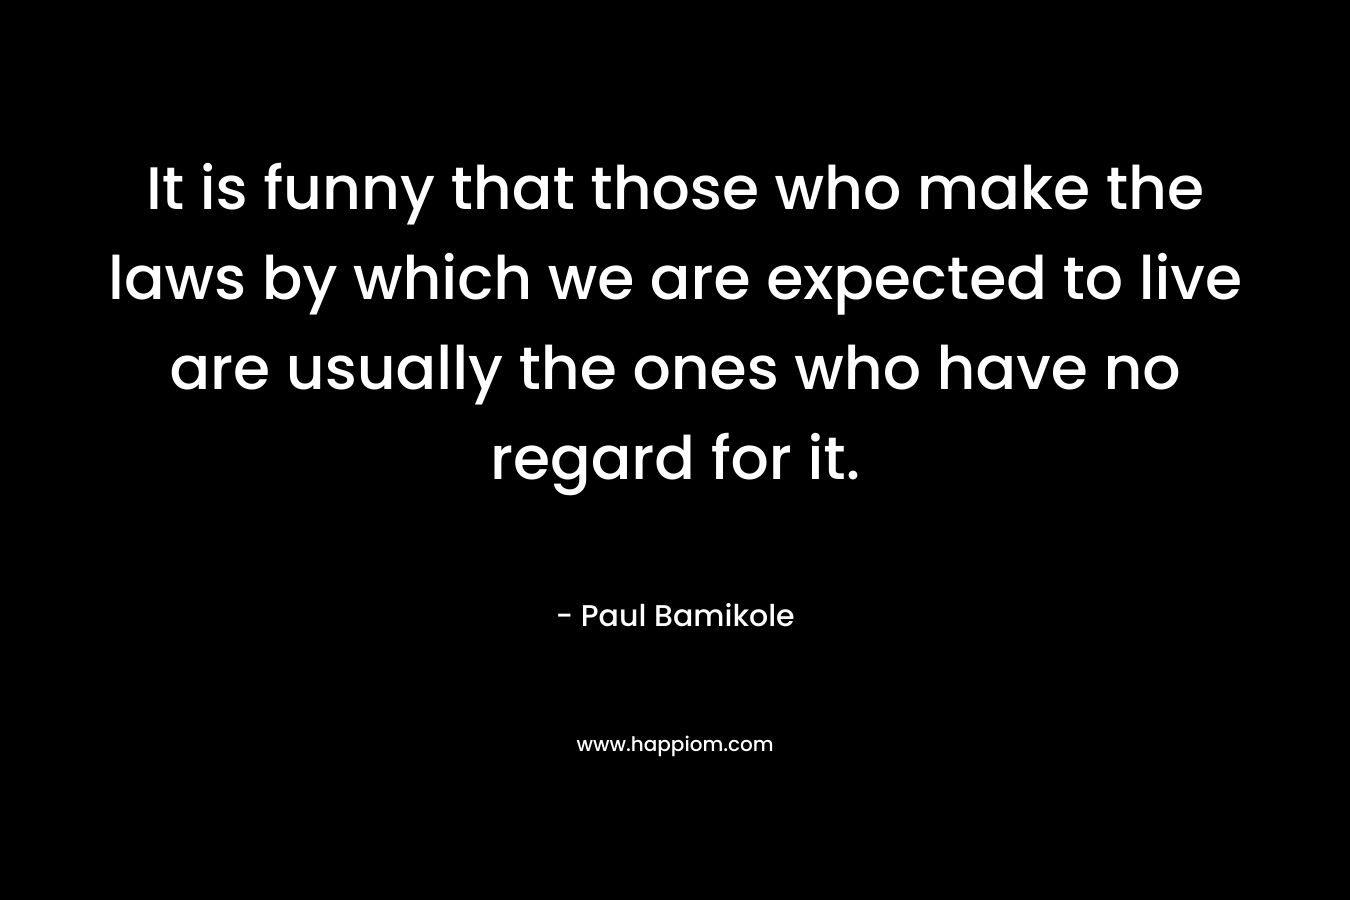 It is funny that those who make the laws by which we are expected to live are usually the ones who have no regard for it. – Paul Bamikole